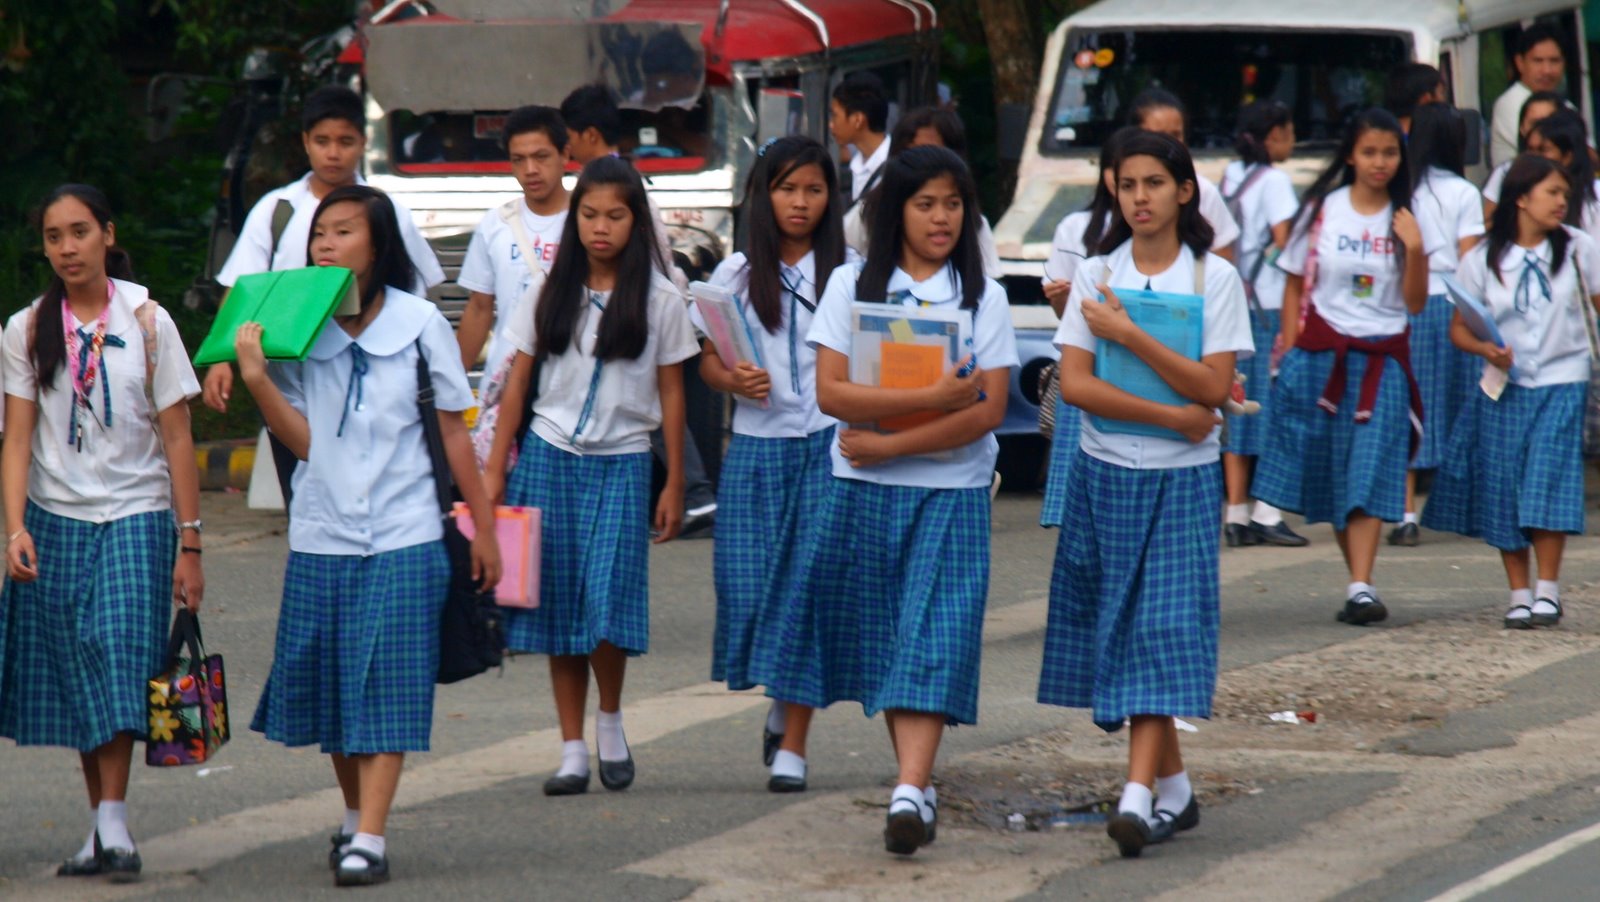 Pinchazo metal Agricultura Should Students Have to Wear School Uniforms? | Danielle's Blog